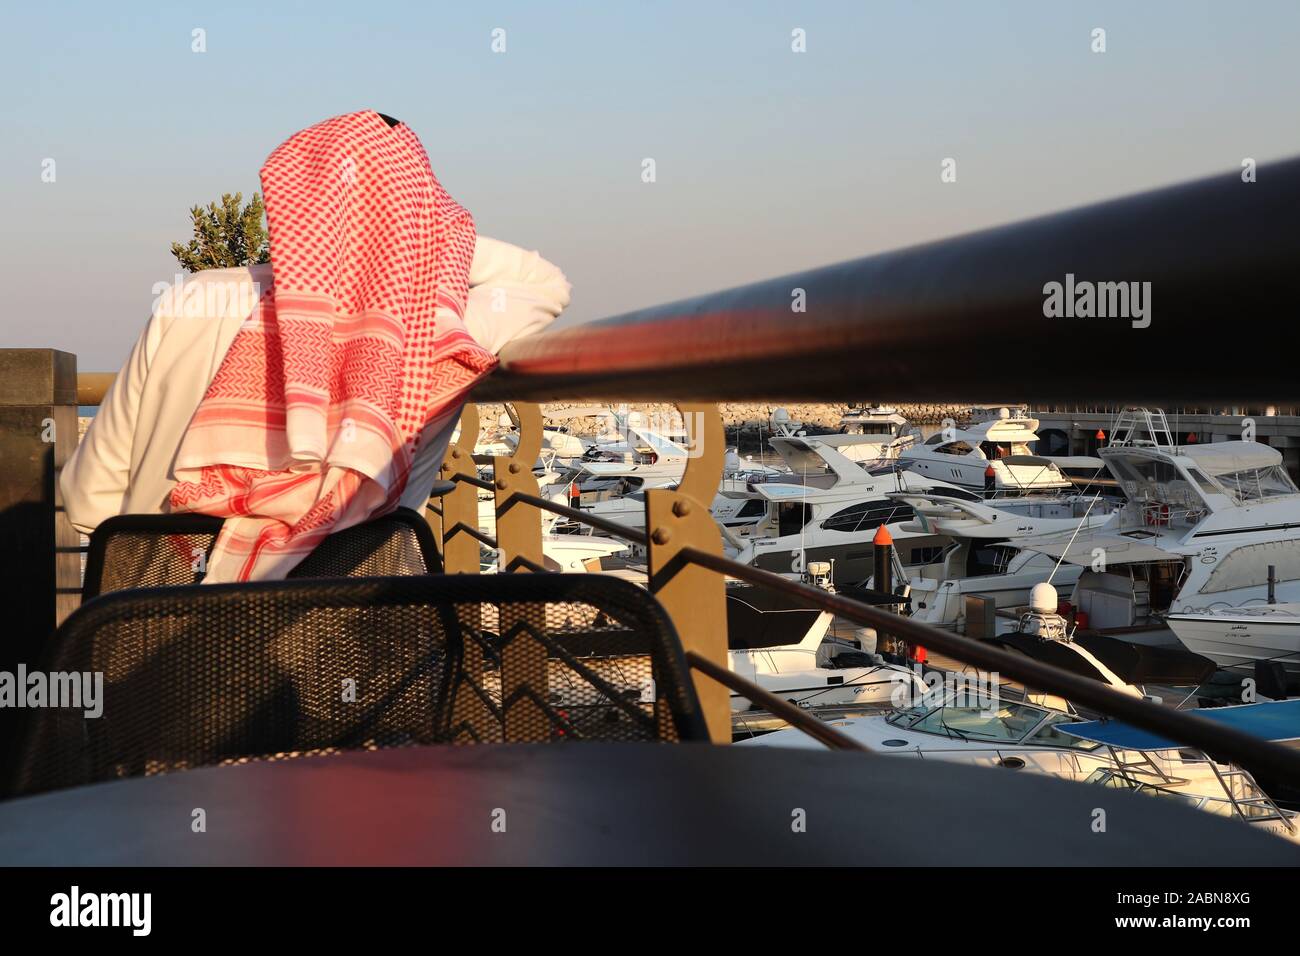 Kuwaiti man wearing red and white head dress (kaffiyeh) seen from behind sitting overlooking a marina with boats Stock Photo